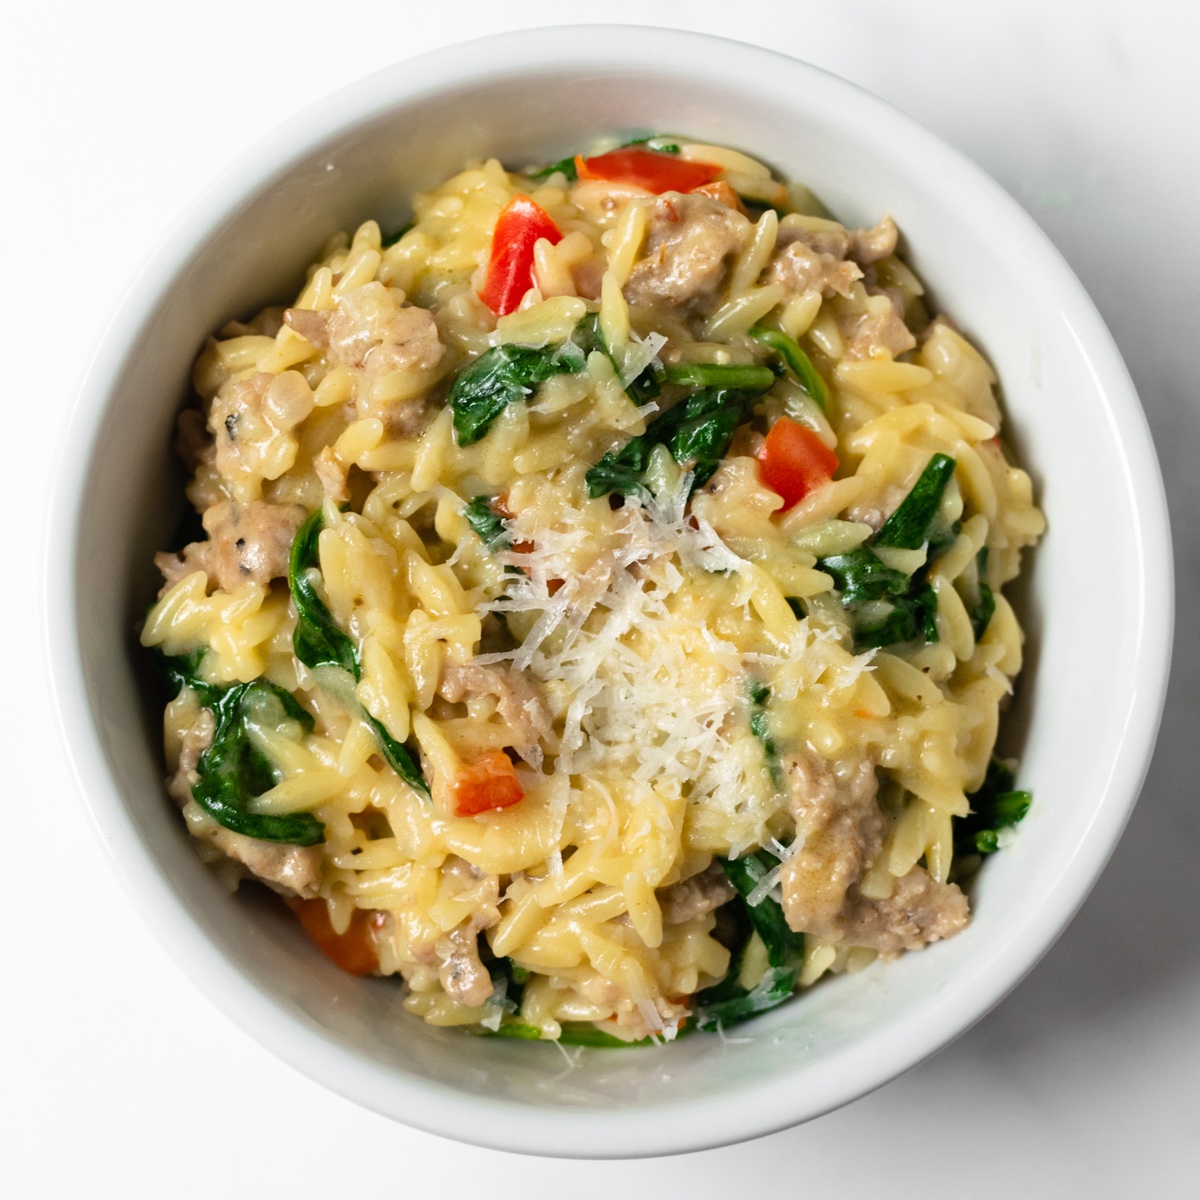 This one pan Italian sausage orzo is a quick and easy meal made with red bell peppers, onions, garlic, orzo, chicken broth, cream, parmesan, and spinach. It's perfect for busy weeknights— minimal effort and minimal clean up!